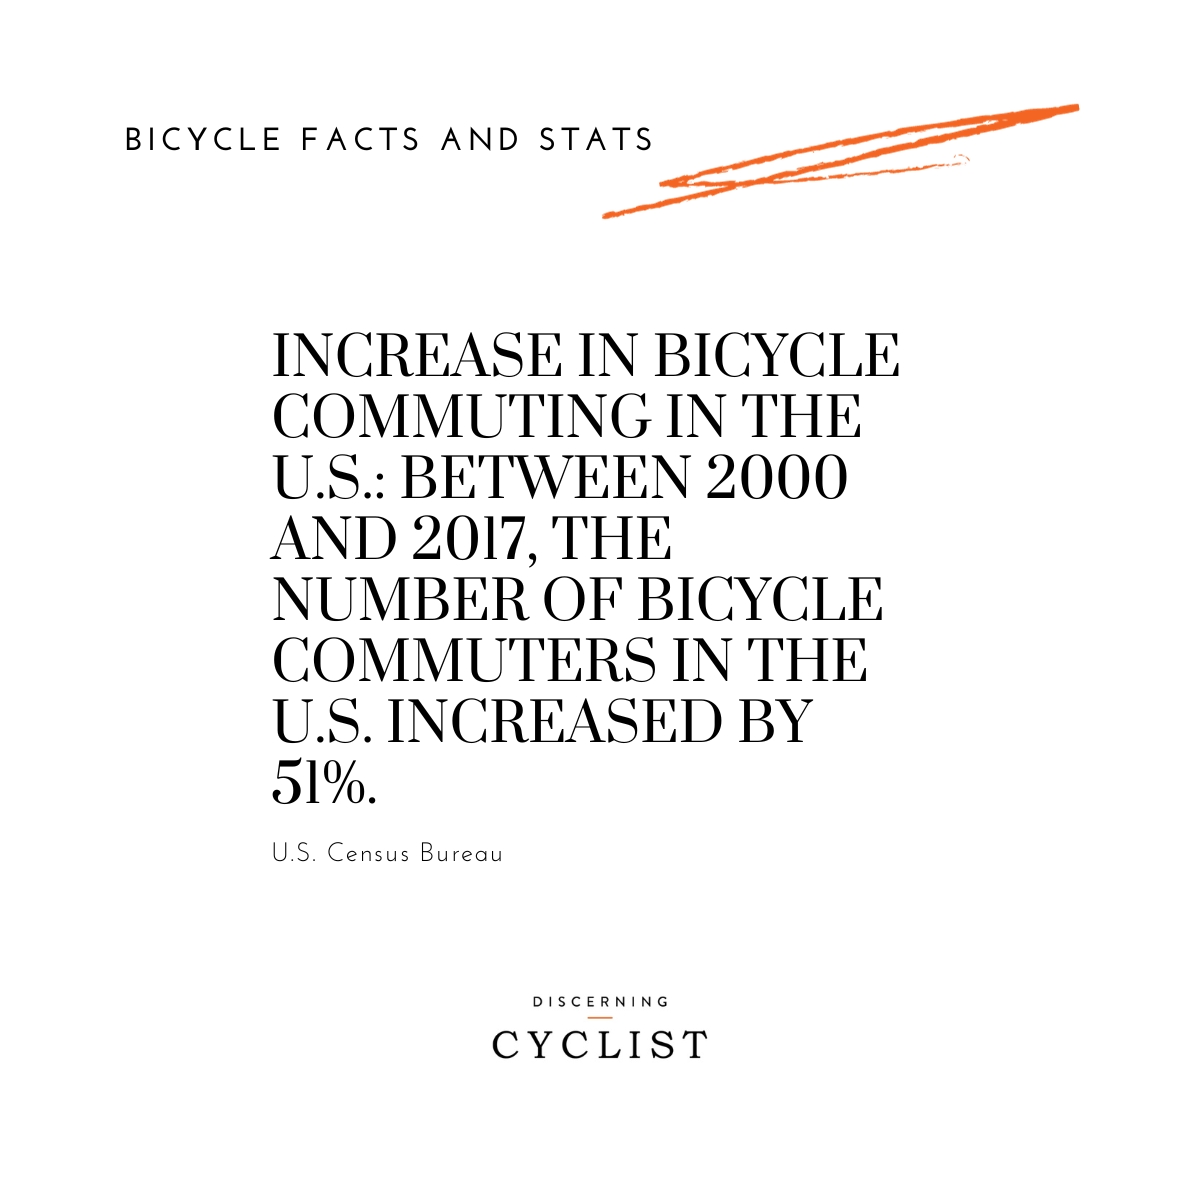 Increase in Bicycle Commuting in the U.S.: Between 2000 and 2017, the number of bicycle commuters in the U.S. increased by 51%.